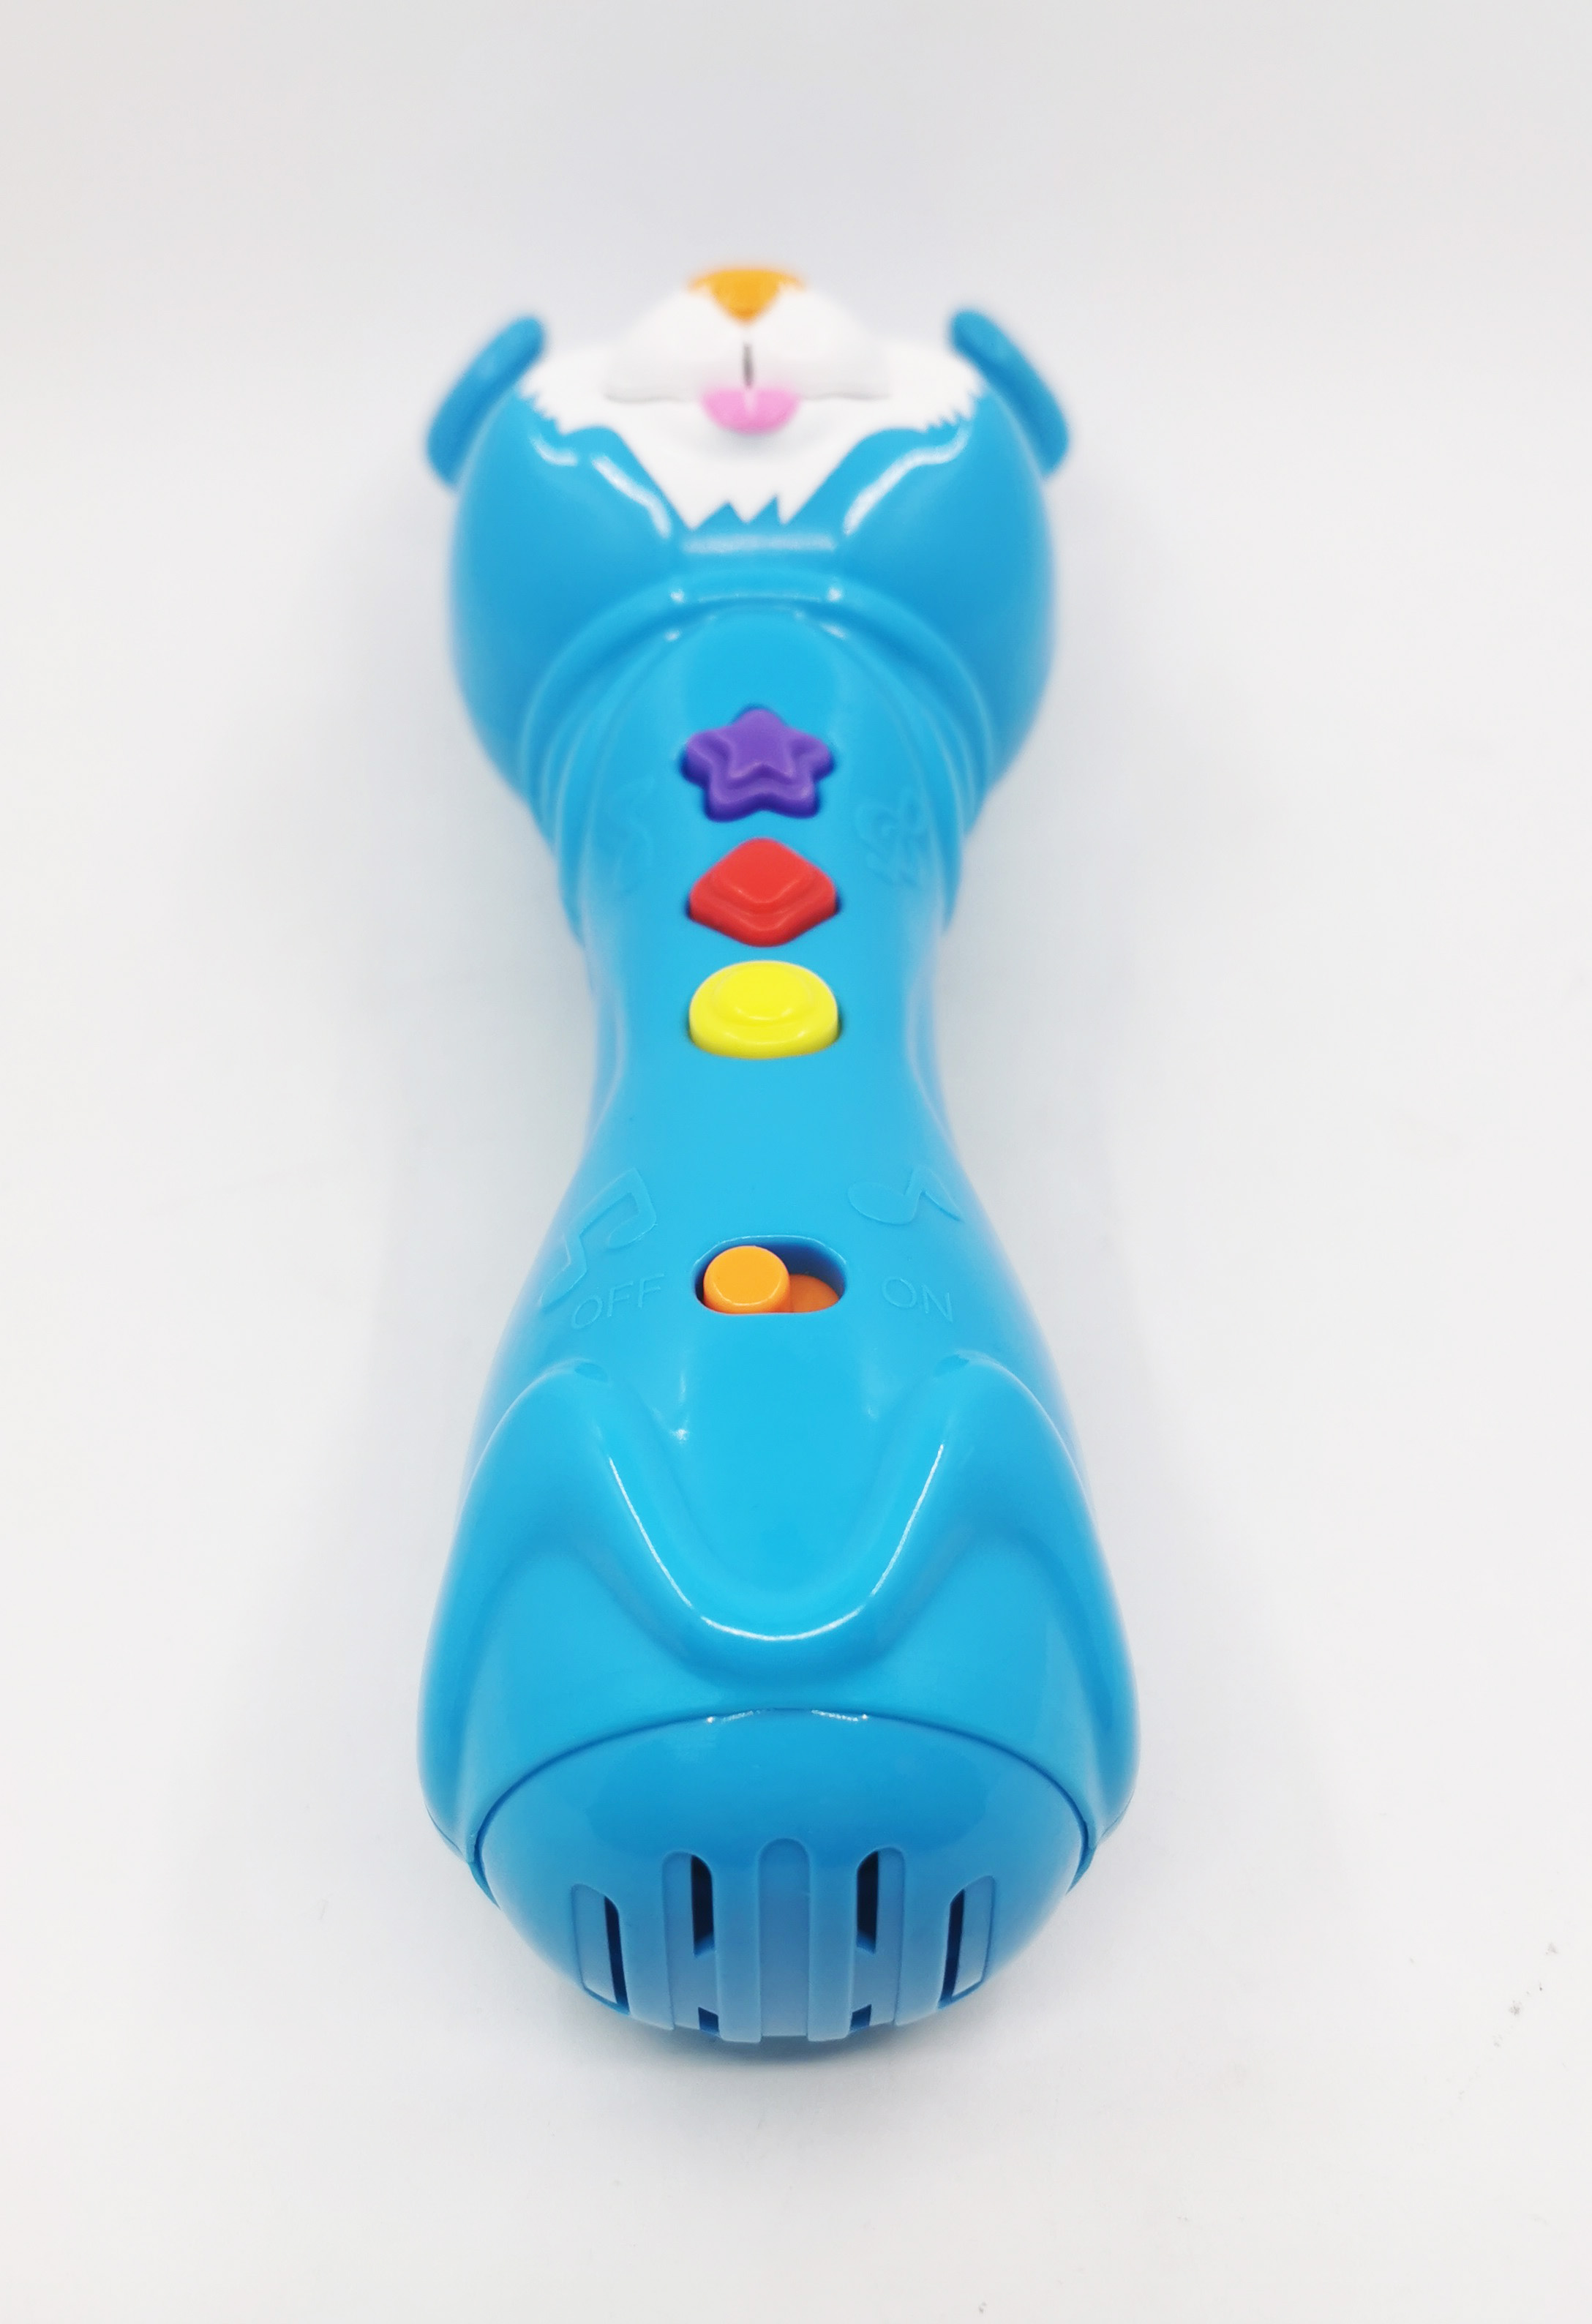 Spark Create Imagine Sing Along Dog Microphone for Kids, Cognitive Development, Ages 3 and Up, Blue - image 2 of 6